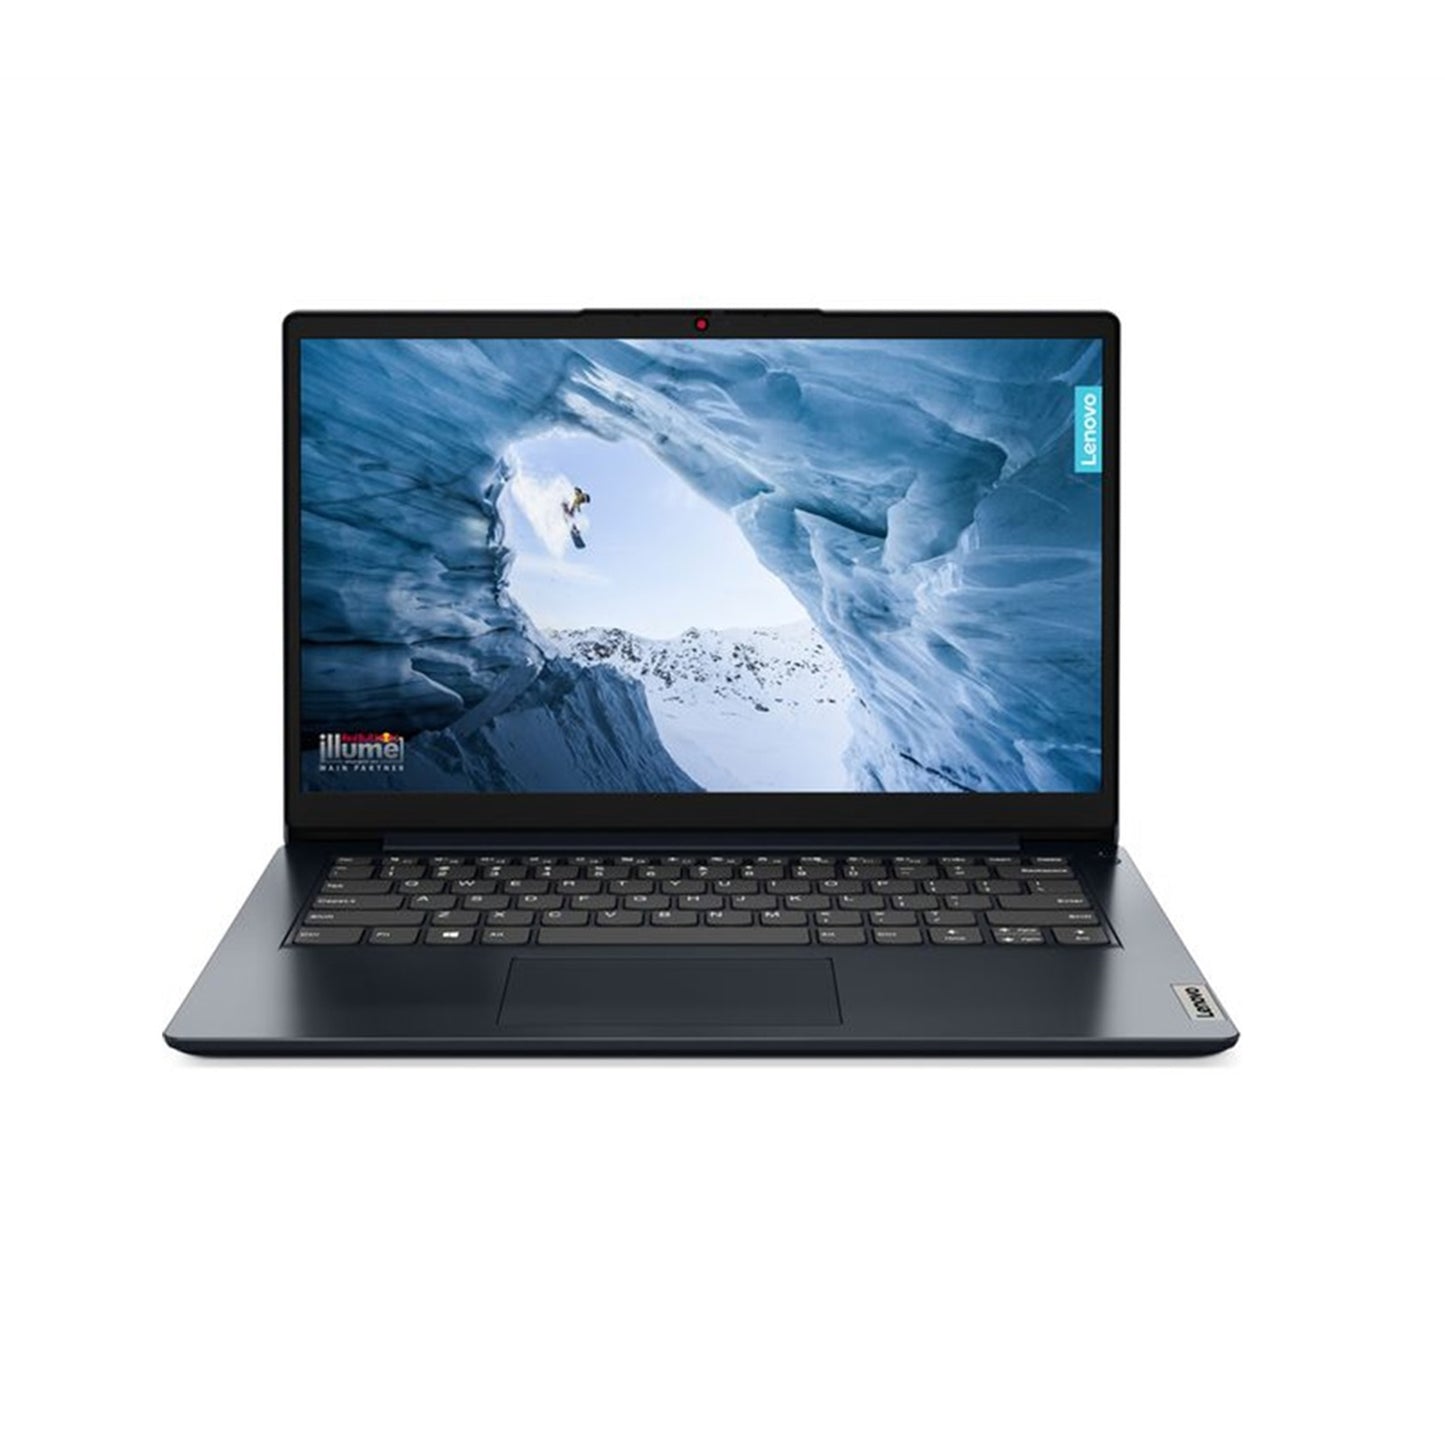 Lenovo IdeaPad 1 Laptop, 14 Inch FHD Screen, Intel Pentium Silver N5030, 4GB RAM, 128GB eMMC, Windows 11 Home S with Microsoft Office 365 Personal 1 Year Included